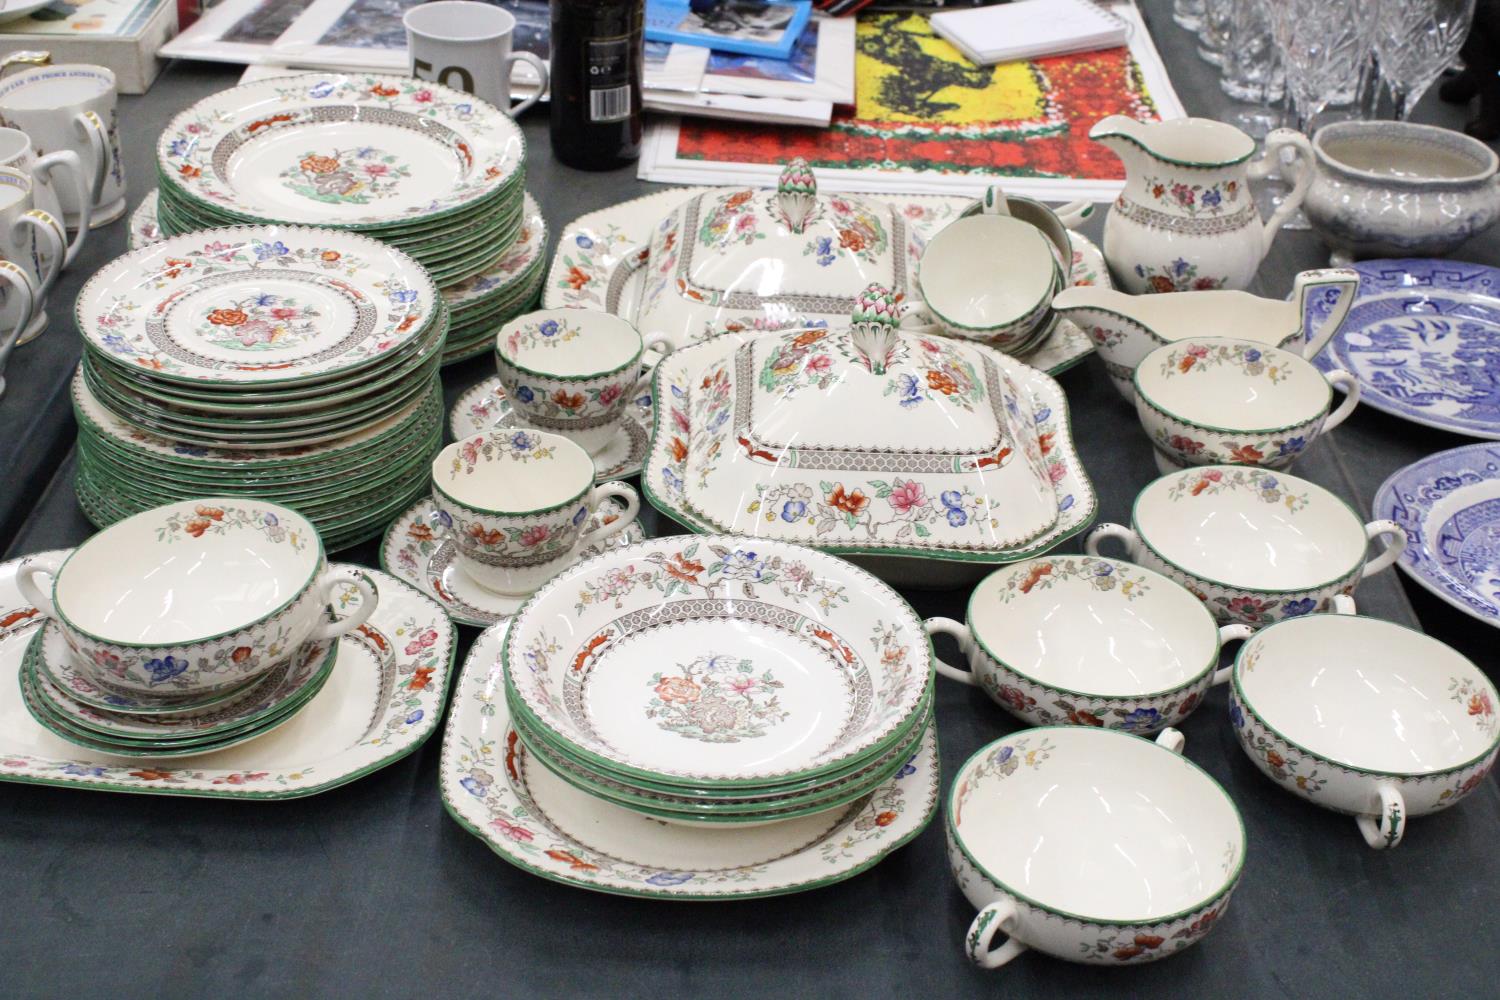 A LARGE SPODE COPELAND "CHINESE ROSE" DINNER SERVICE TO INCLUDE PLATES, SOUP BOWLS, JUGS, A